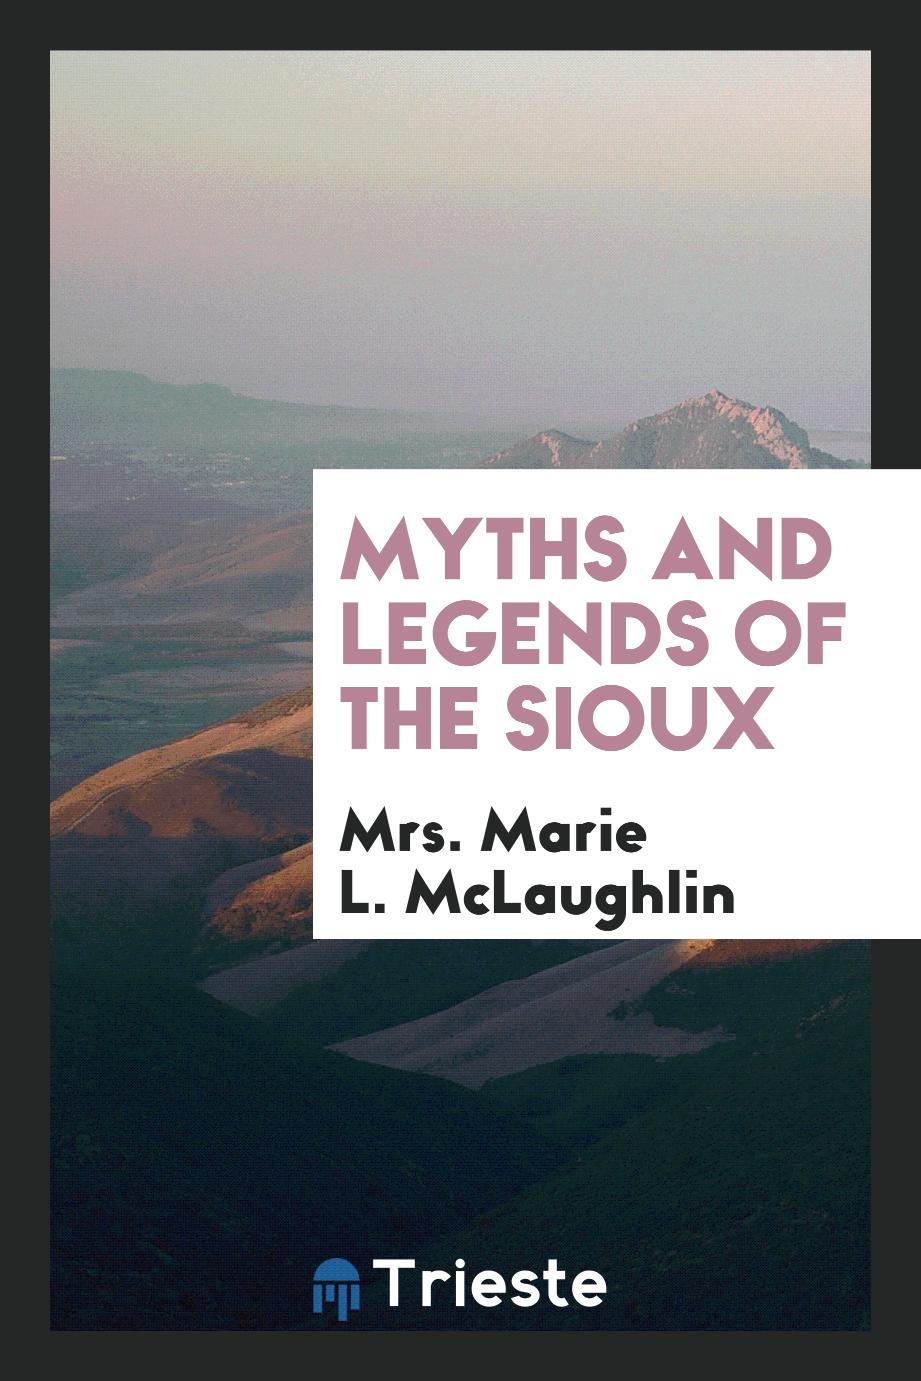 Myths and legends of the Sioux